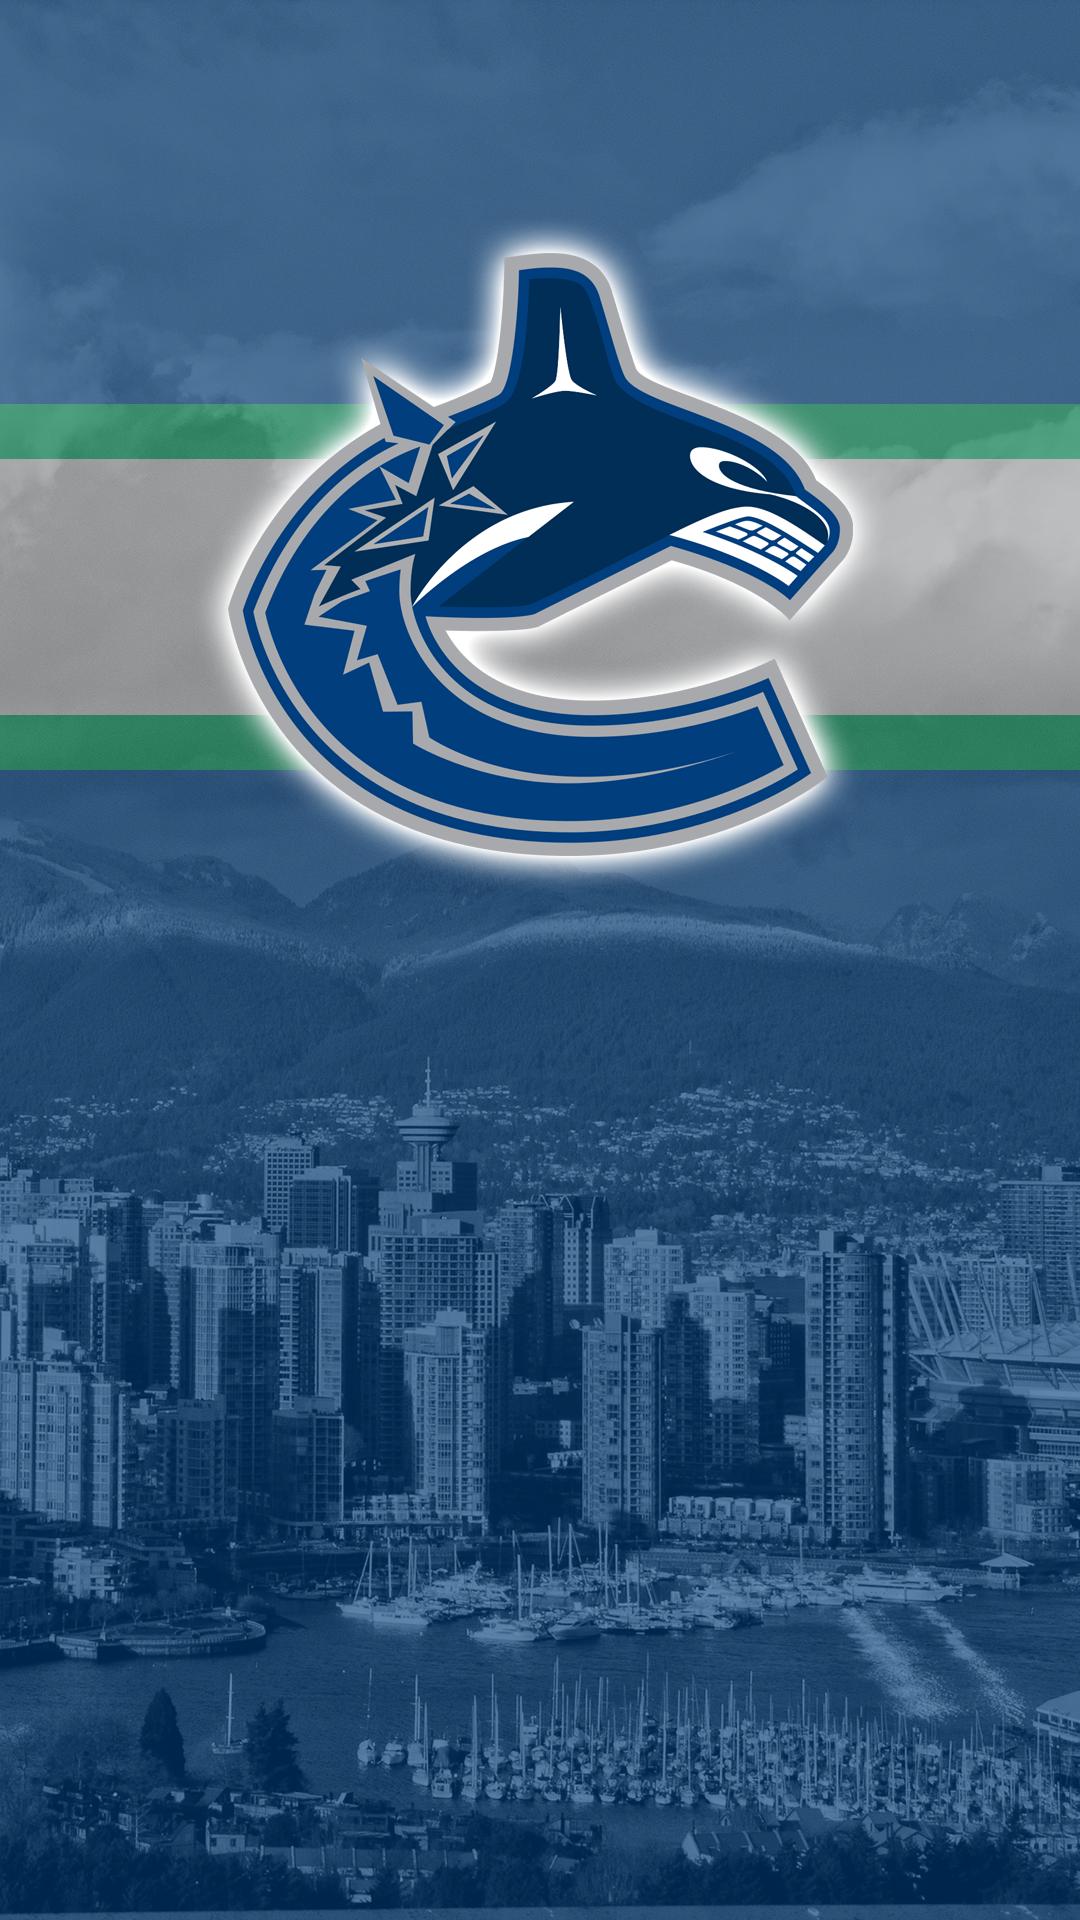 U Natfan9 Posted A Set Of Phone Wallpaper In R Hockey Here Are